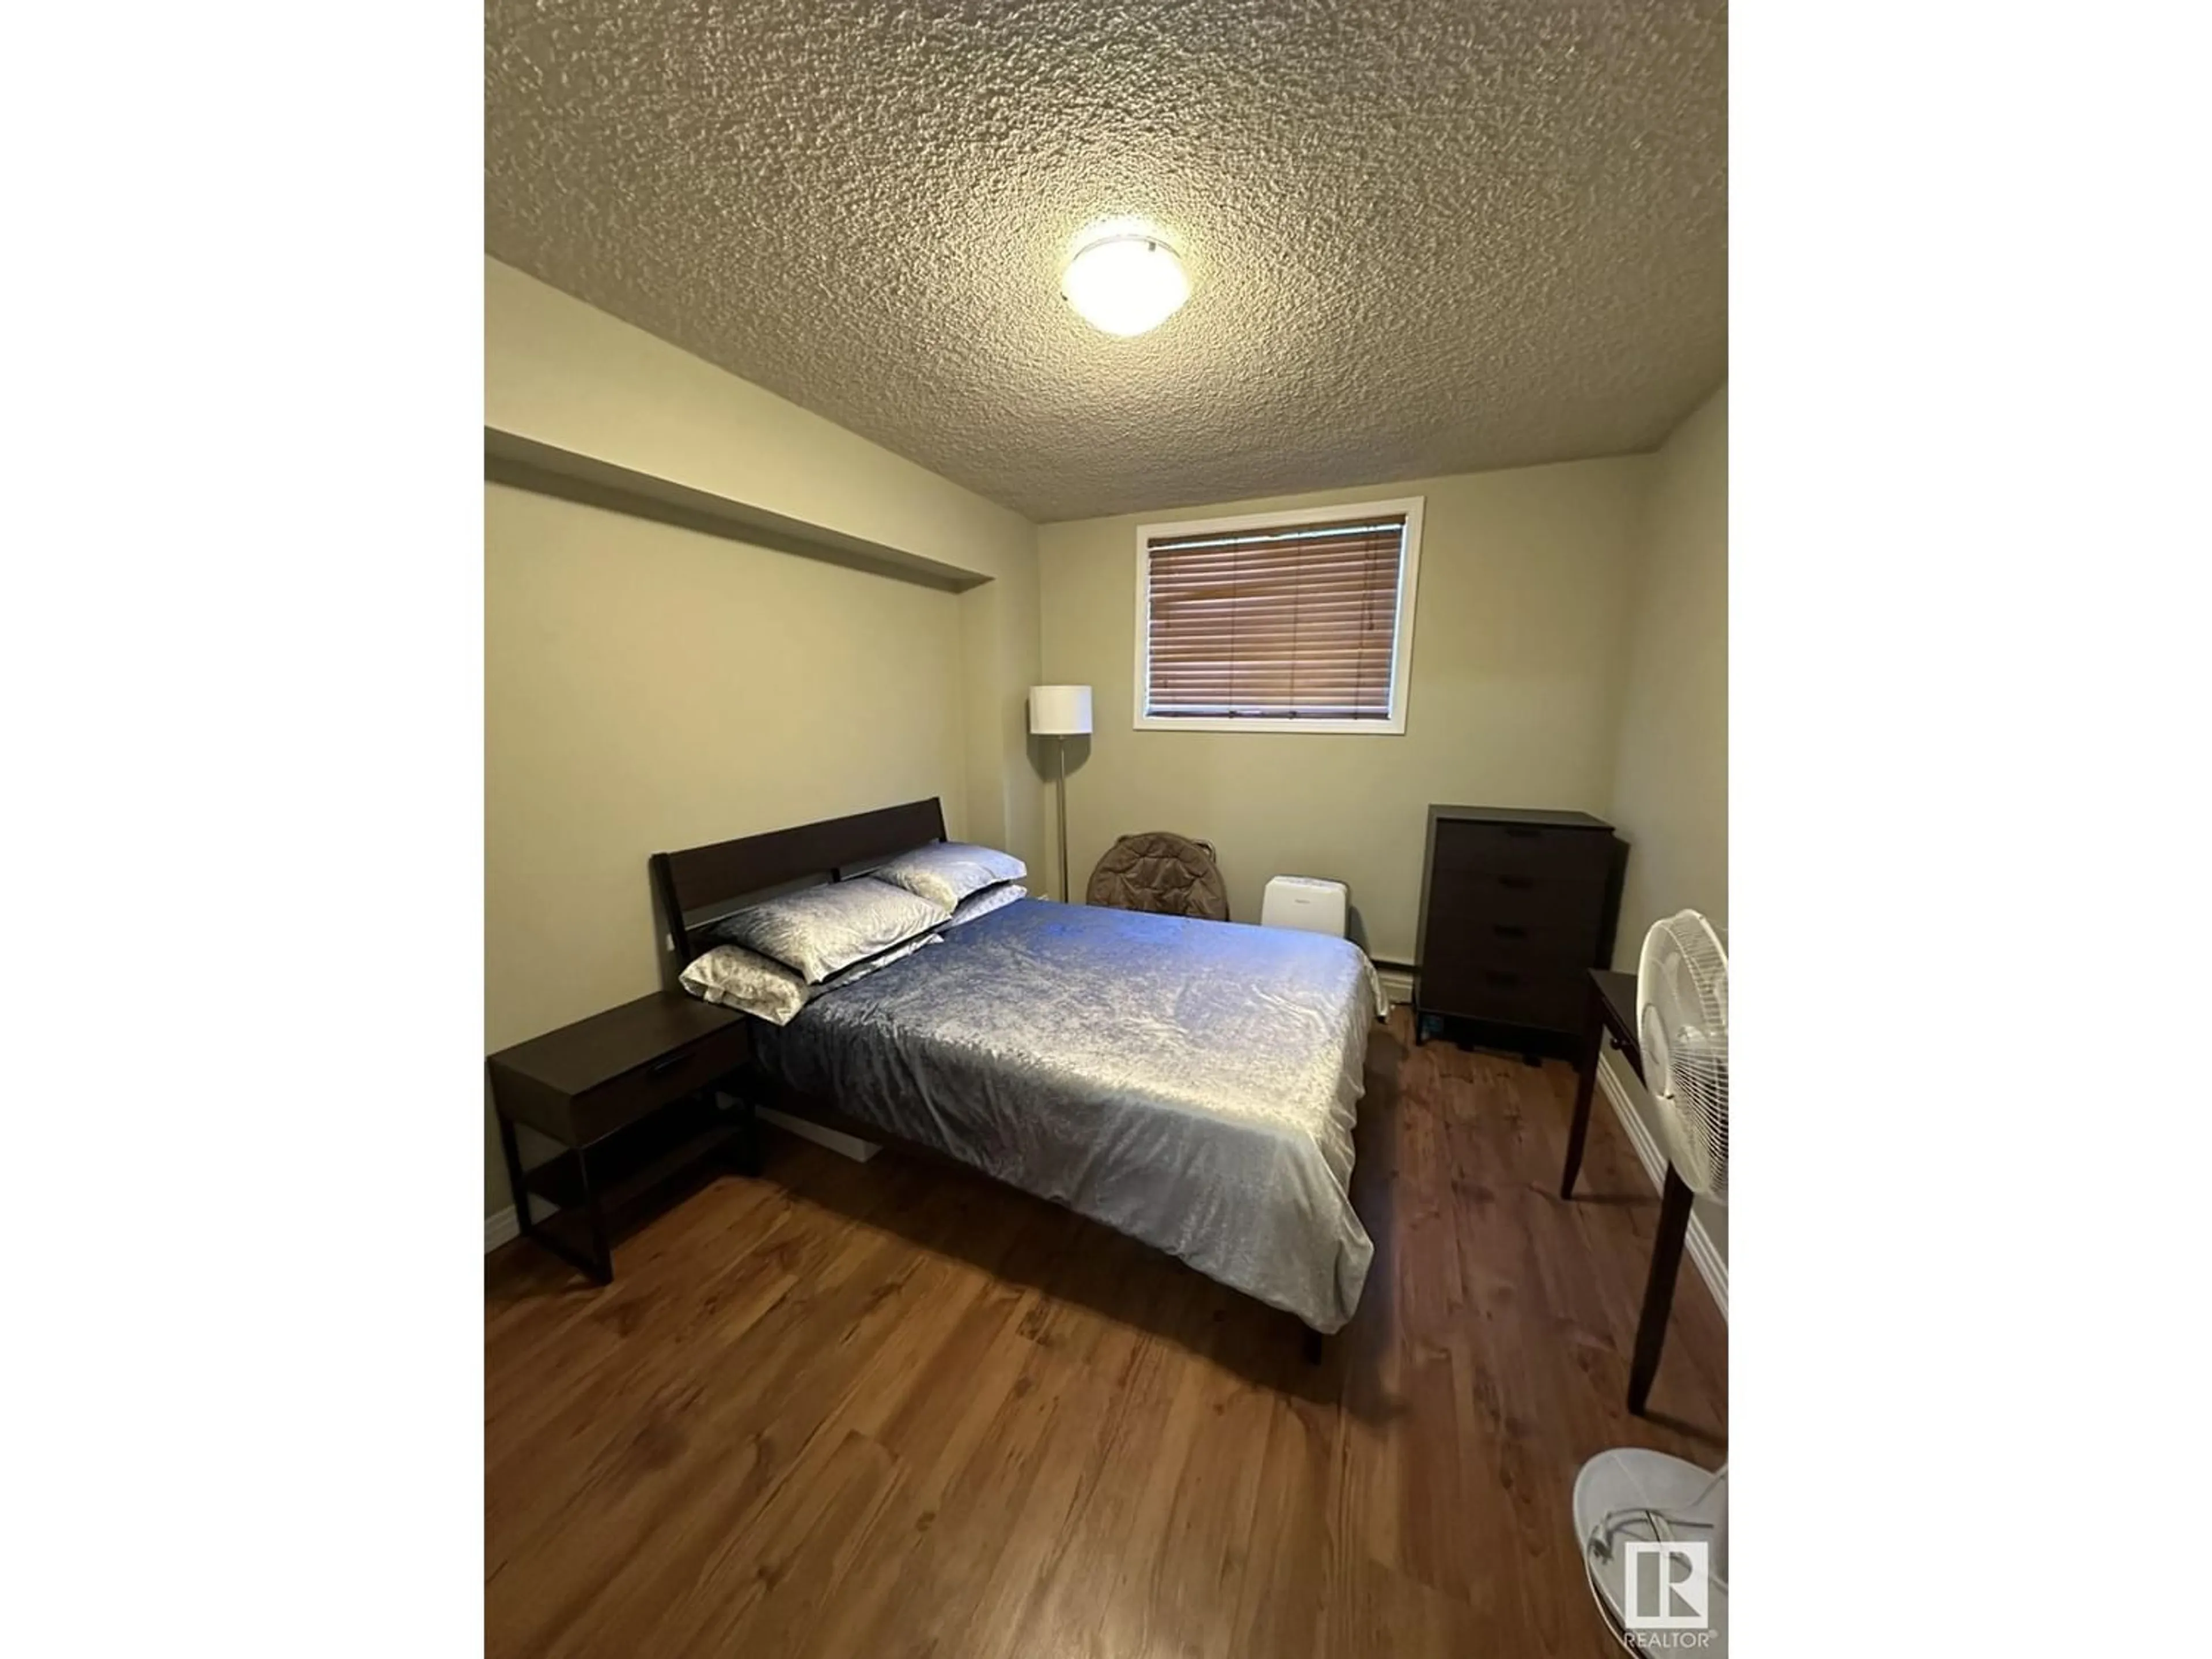 A pic of a room for #103 8215 83 AV NW, Edmonton Alberta T6C1A7